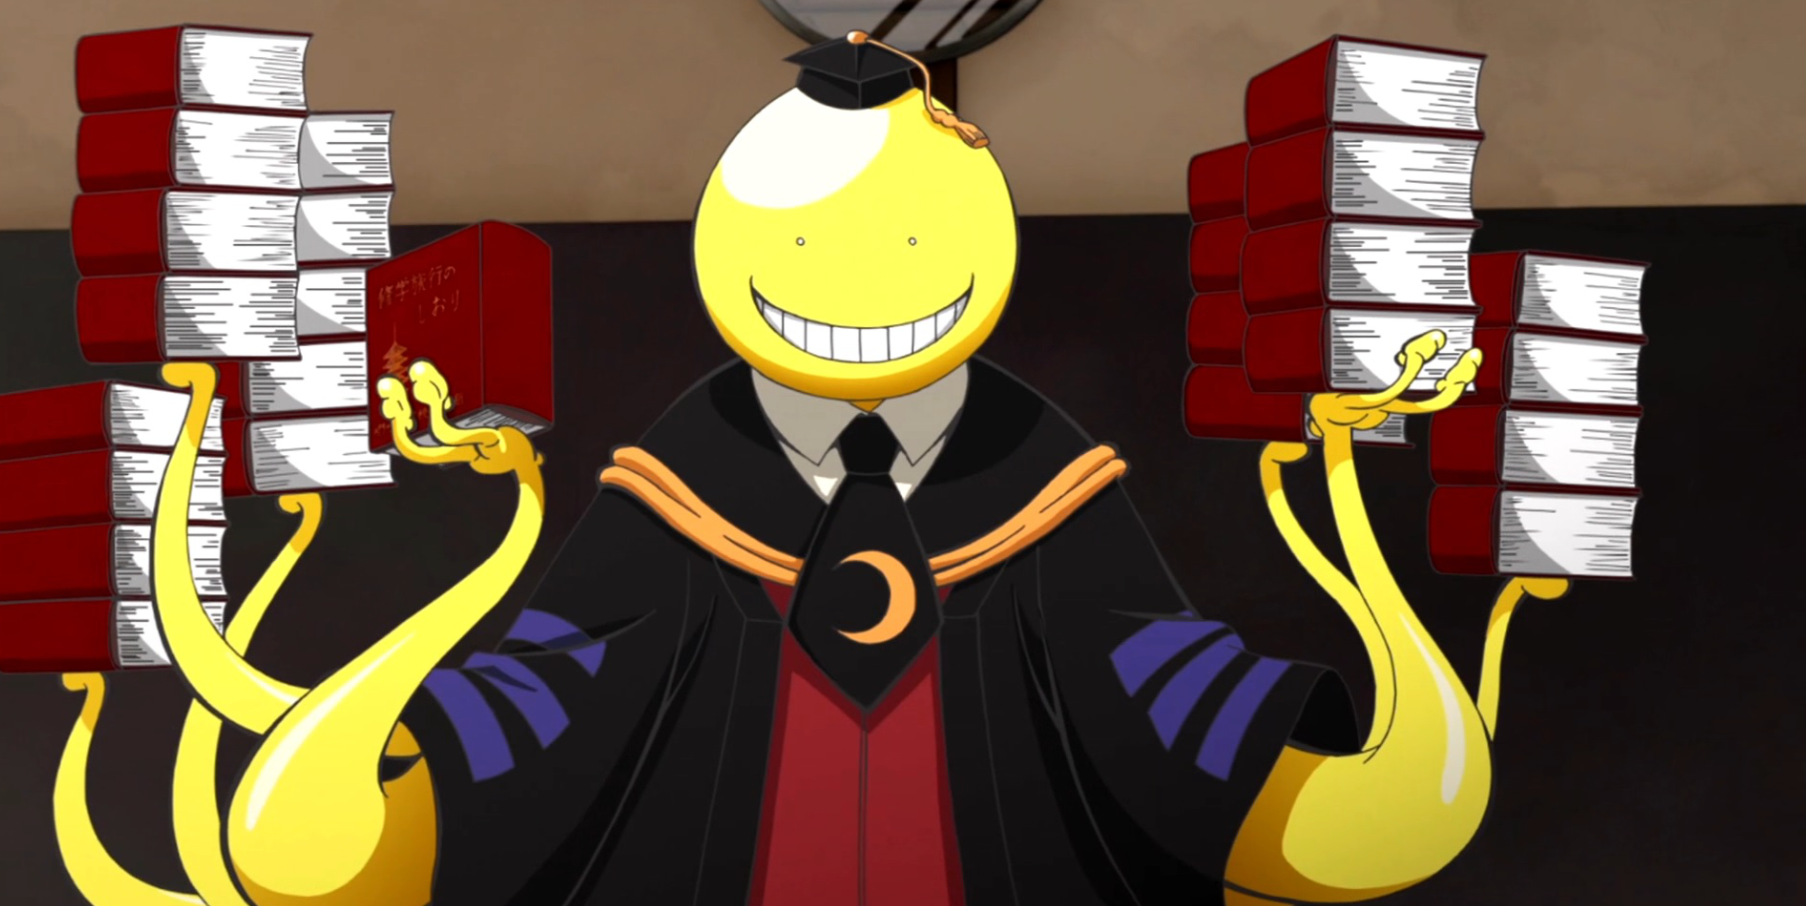 Where to Watch & Read Assassination Classroom